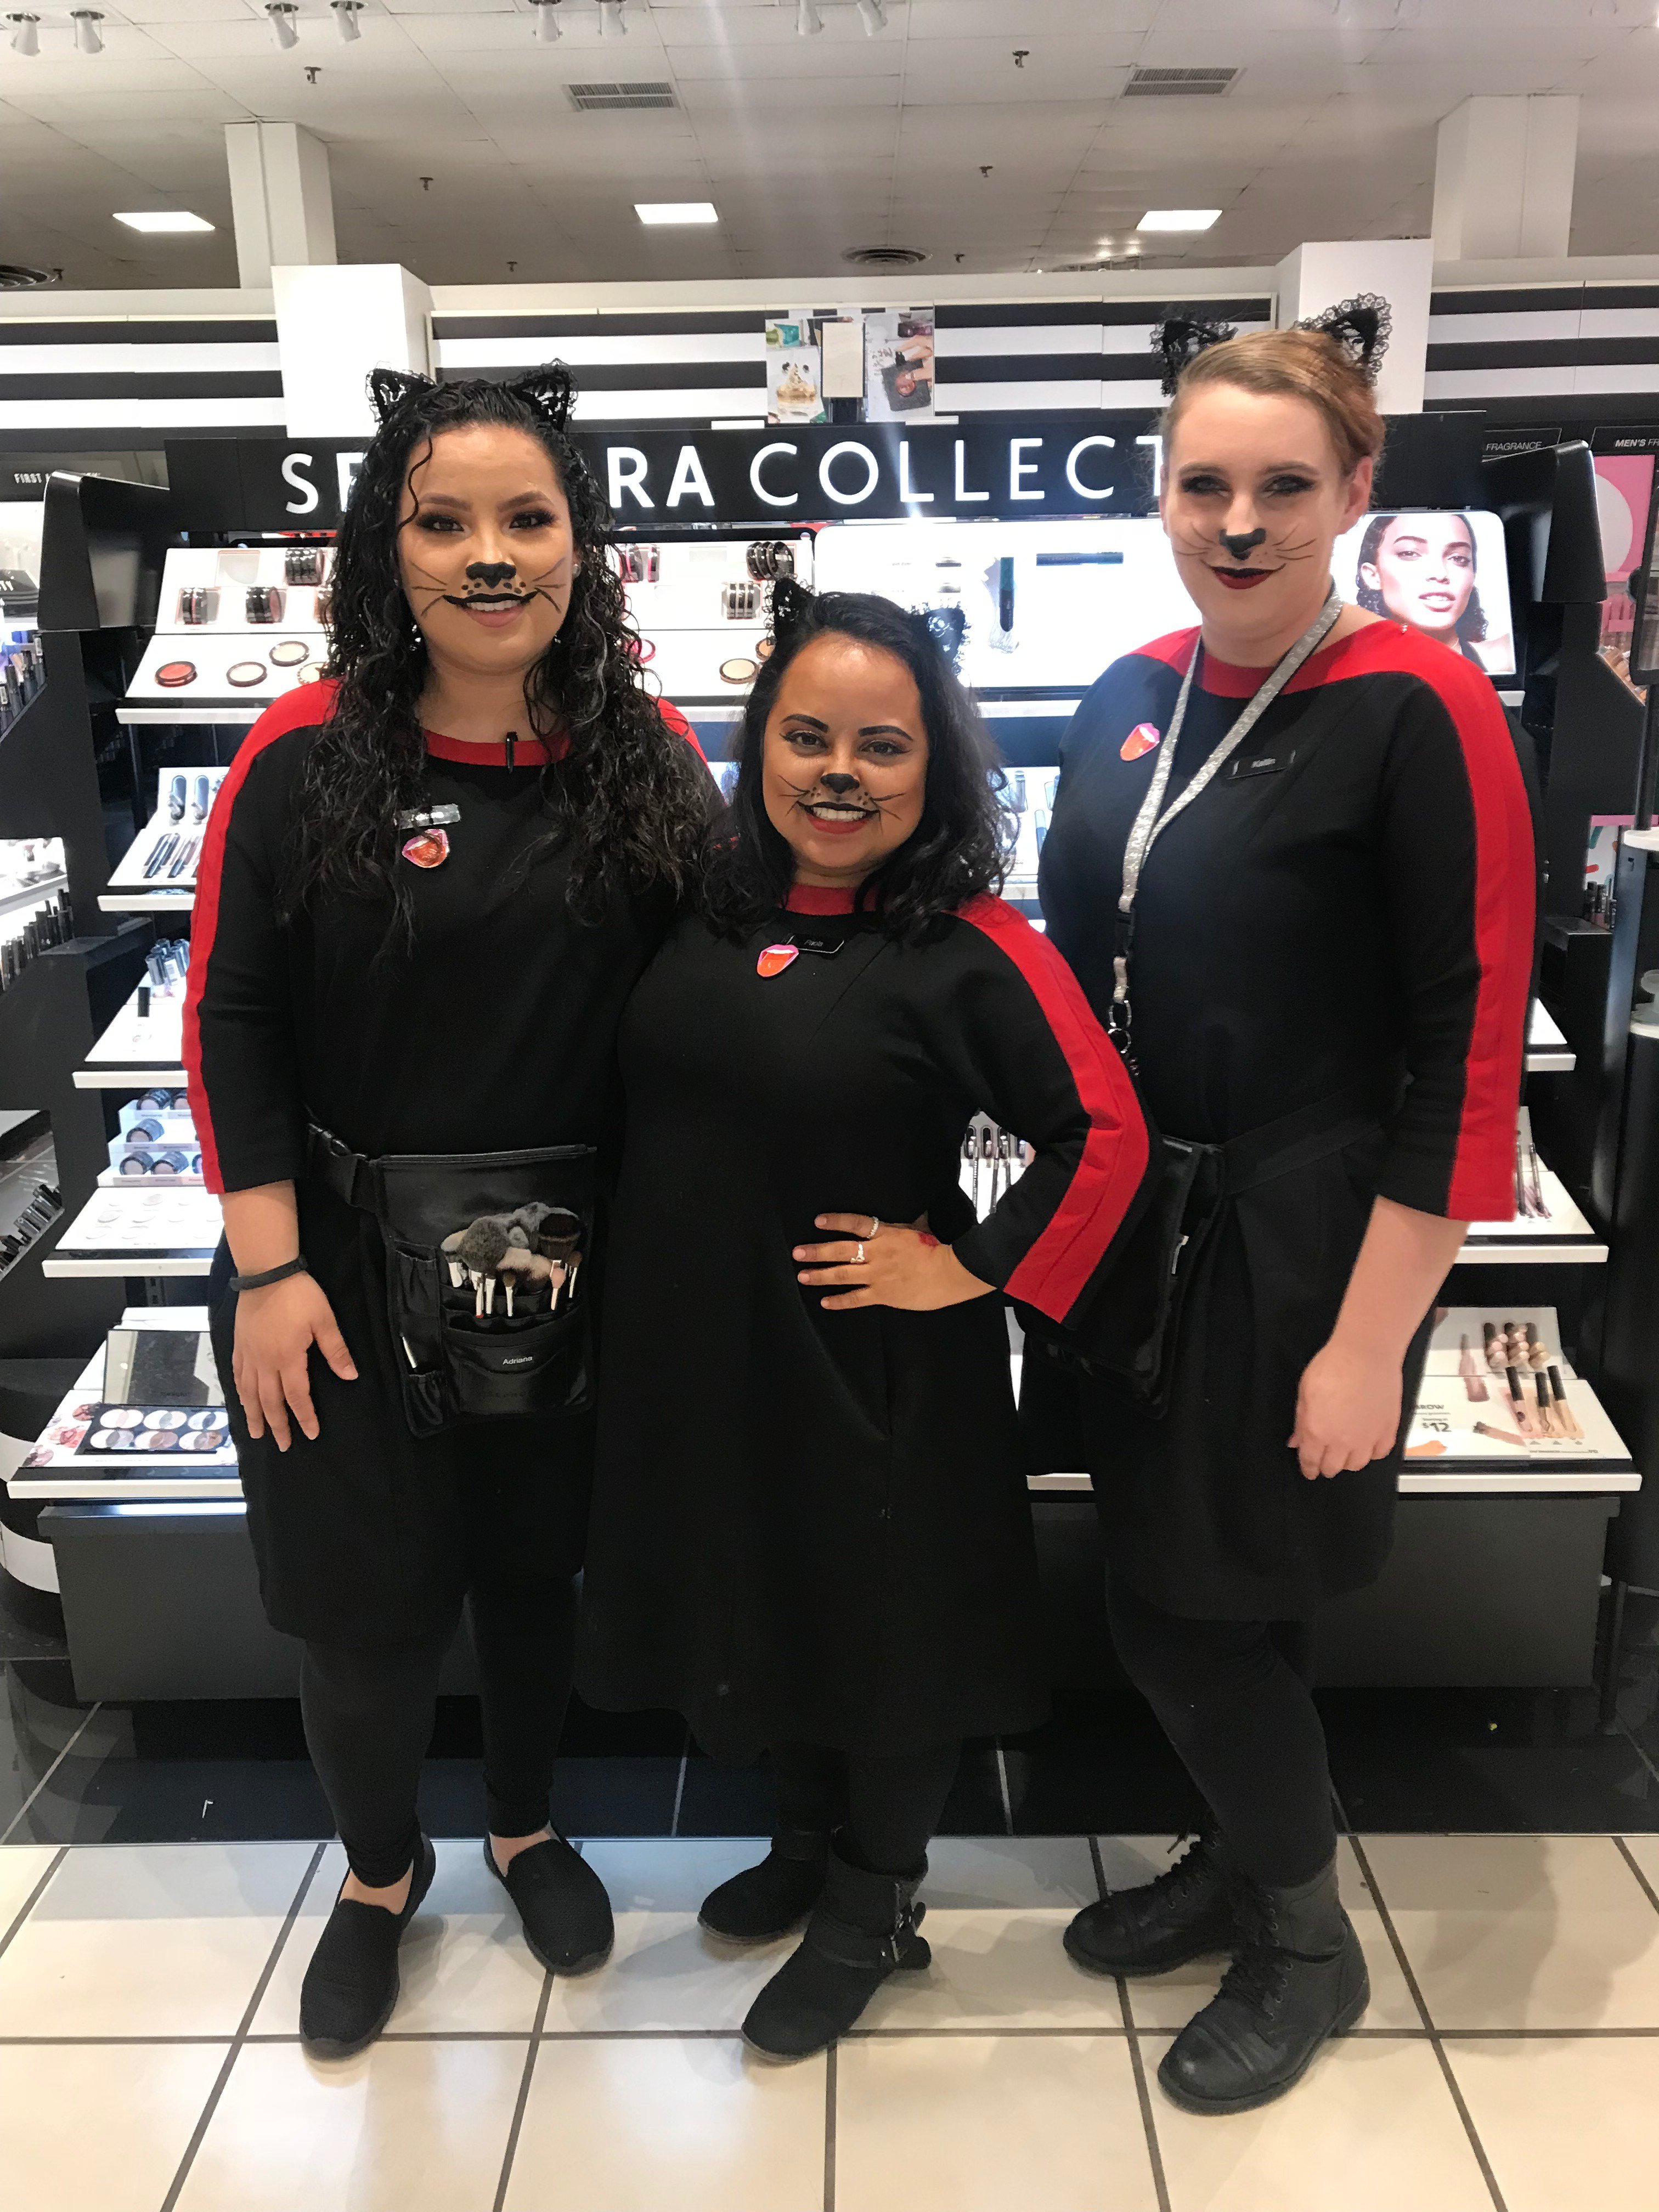 JCPenney News on X: Our free, monthly Kids Zone events continue to drive  traffic to @JCPenney stores. In October, kids decorated spooky haunted  houses for Halloween. Our Sephora inside JCPenney associates from